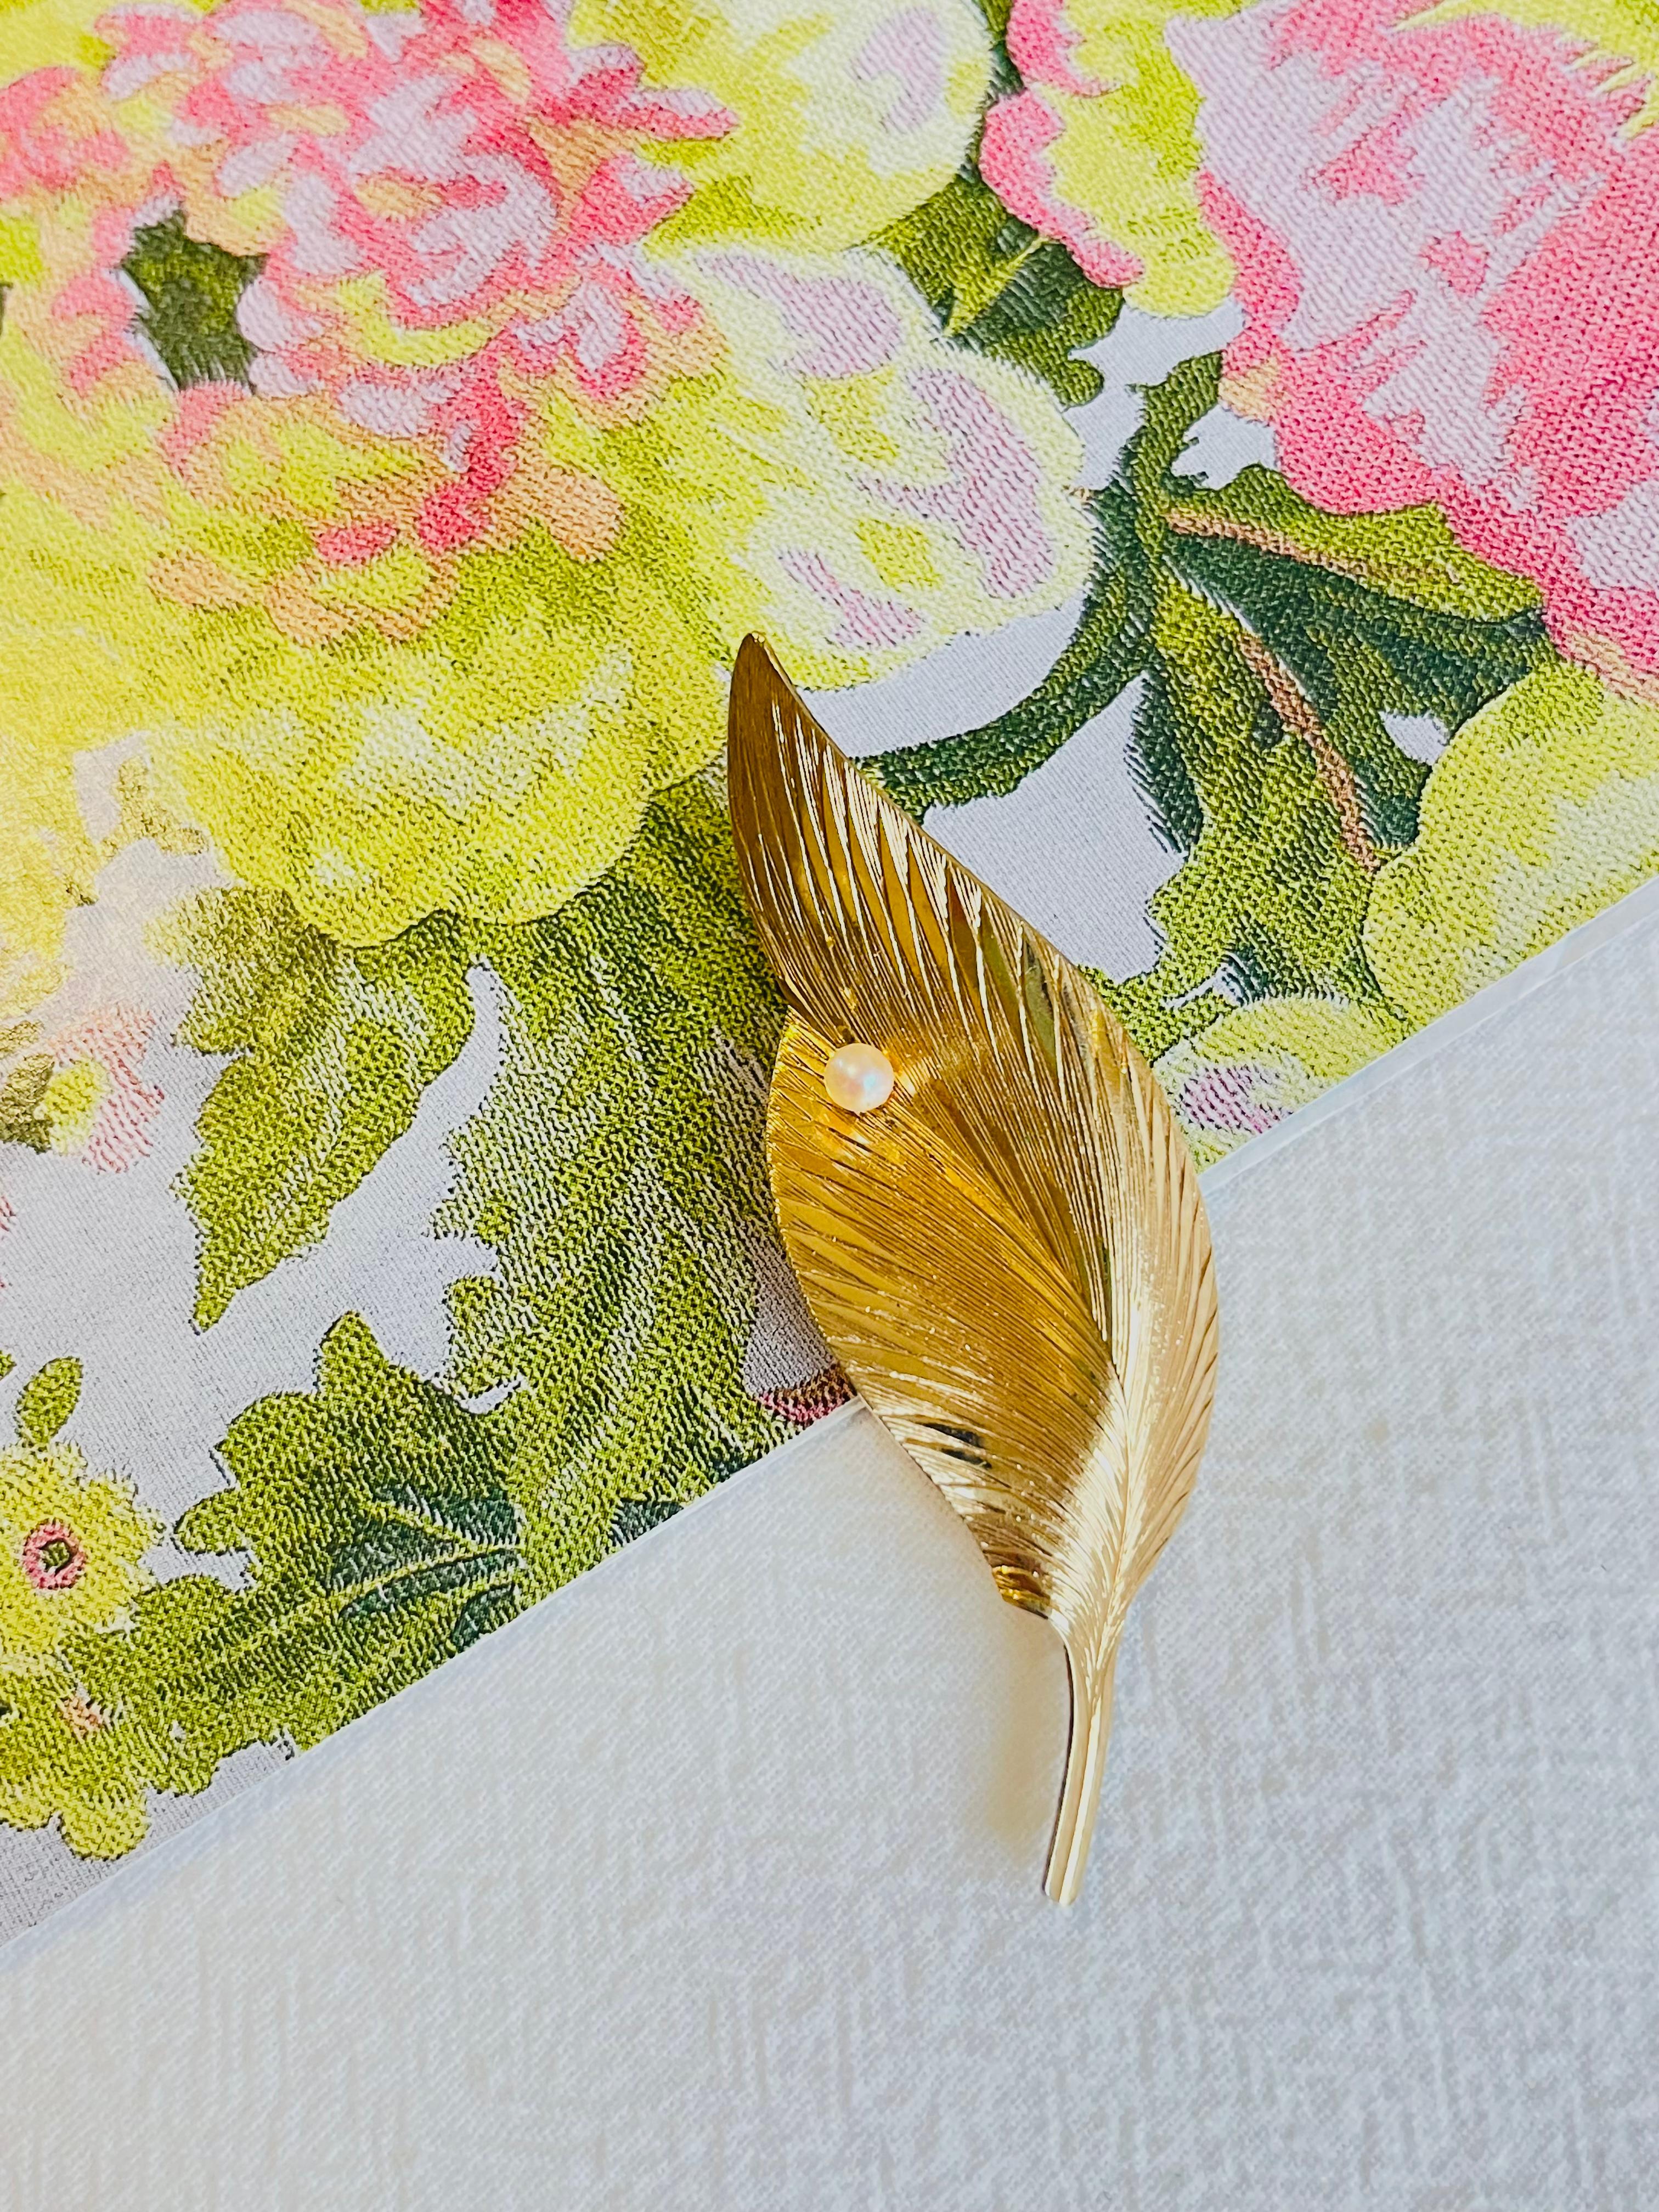 Early Victorian Christian Dior GROSSE 1964 Vintage Vivid Wavy Leaf Pearl Exquisite Gold Brooch For Sale